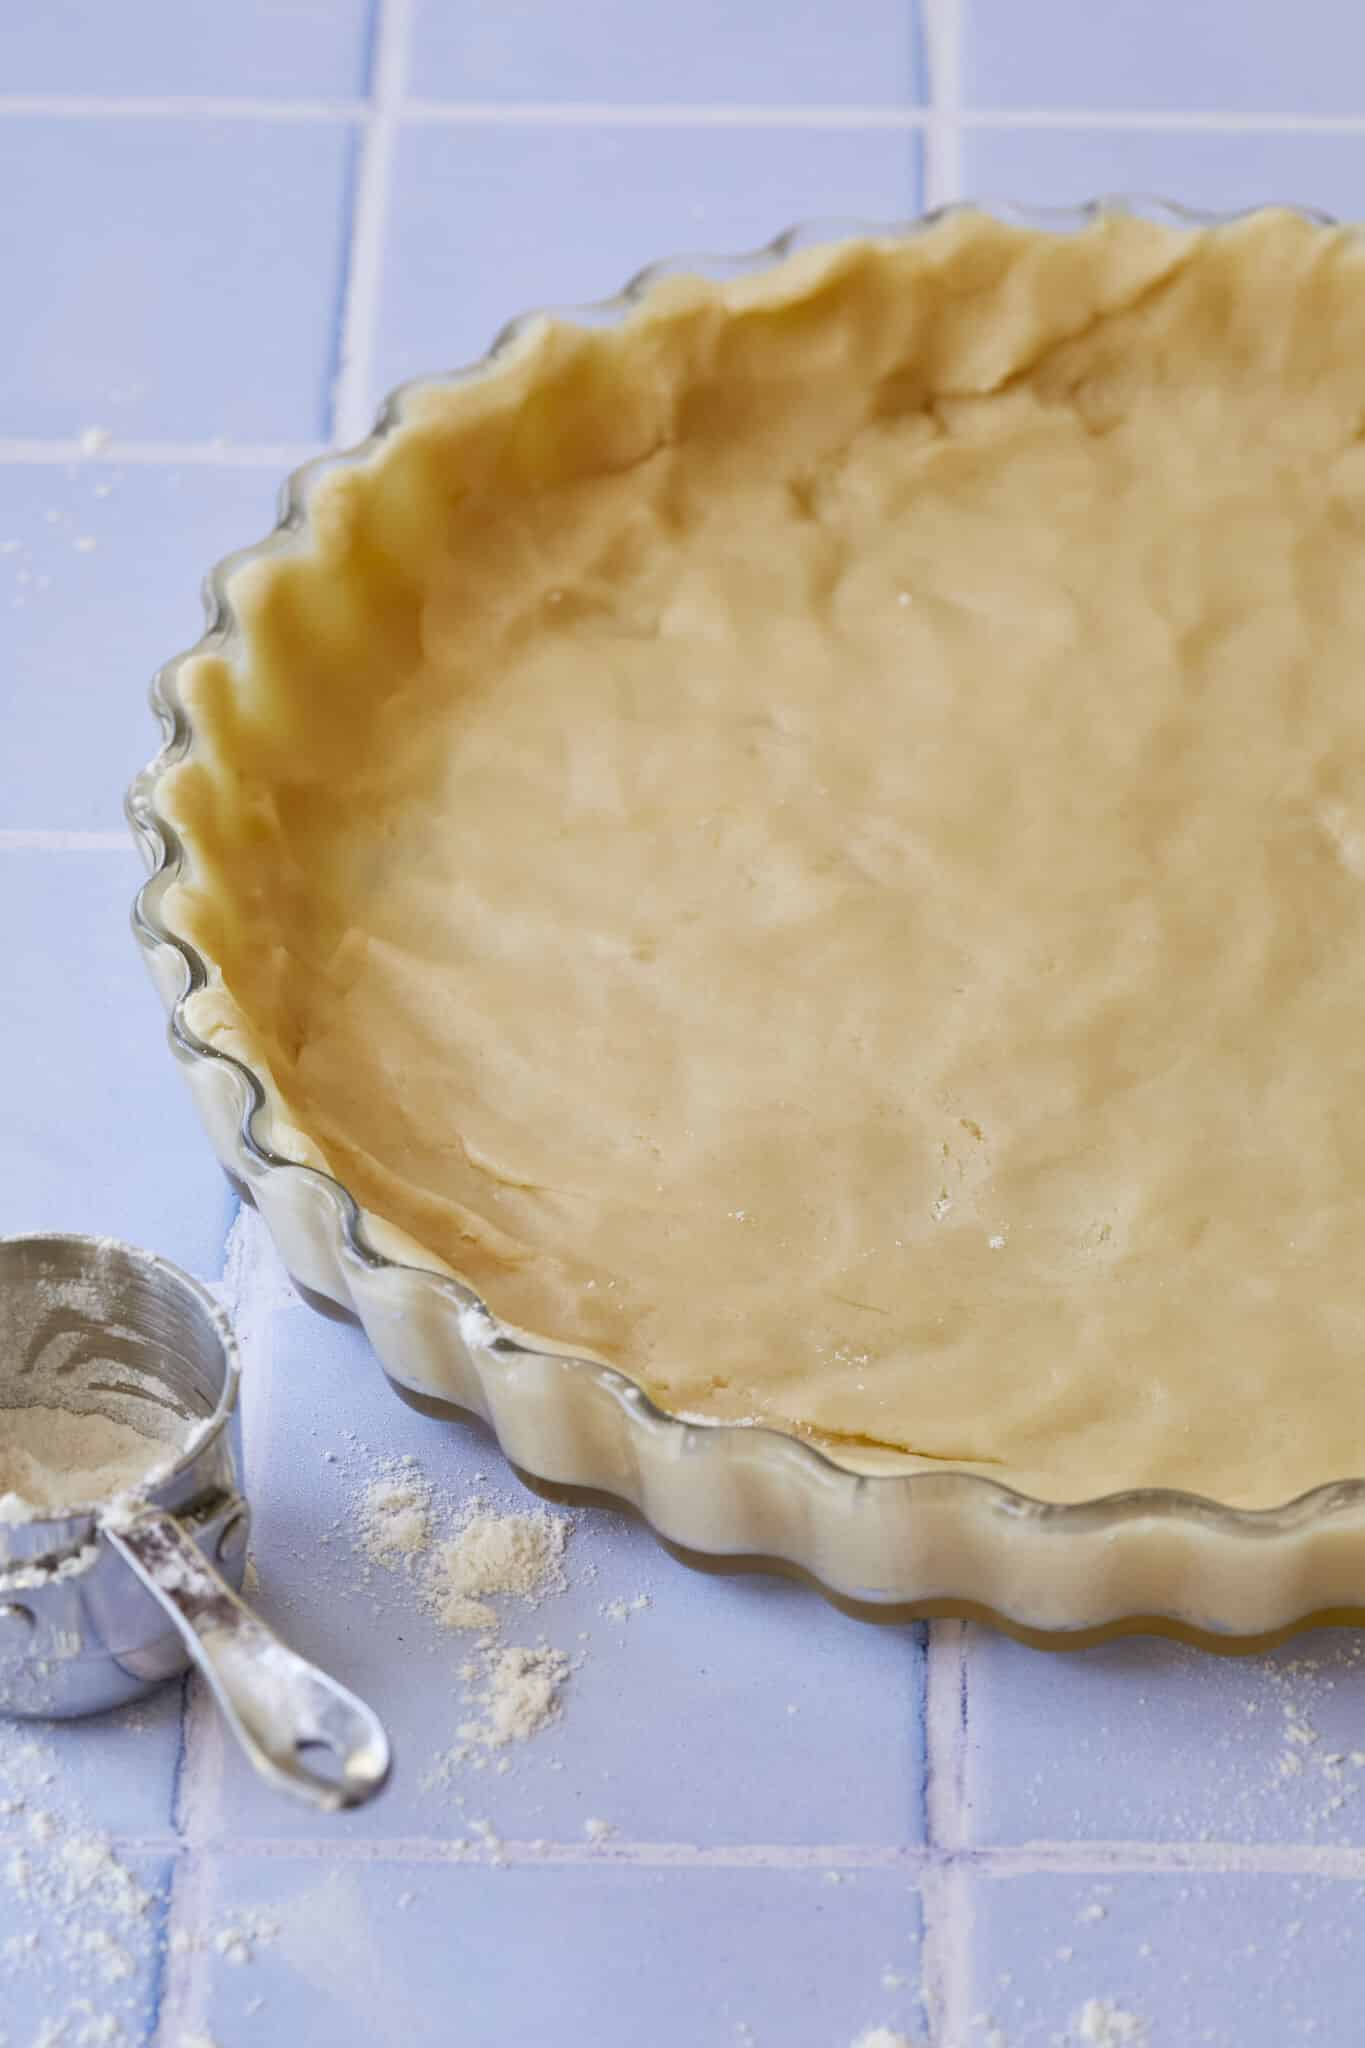 Pâte Sucrée pastry is pressed into a tart dish with dusting flour on the side